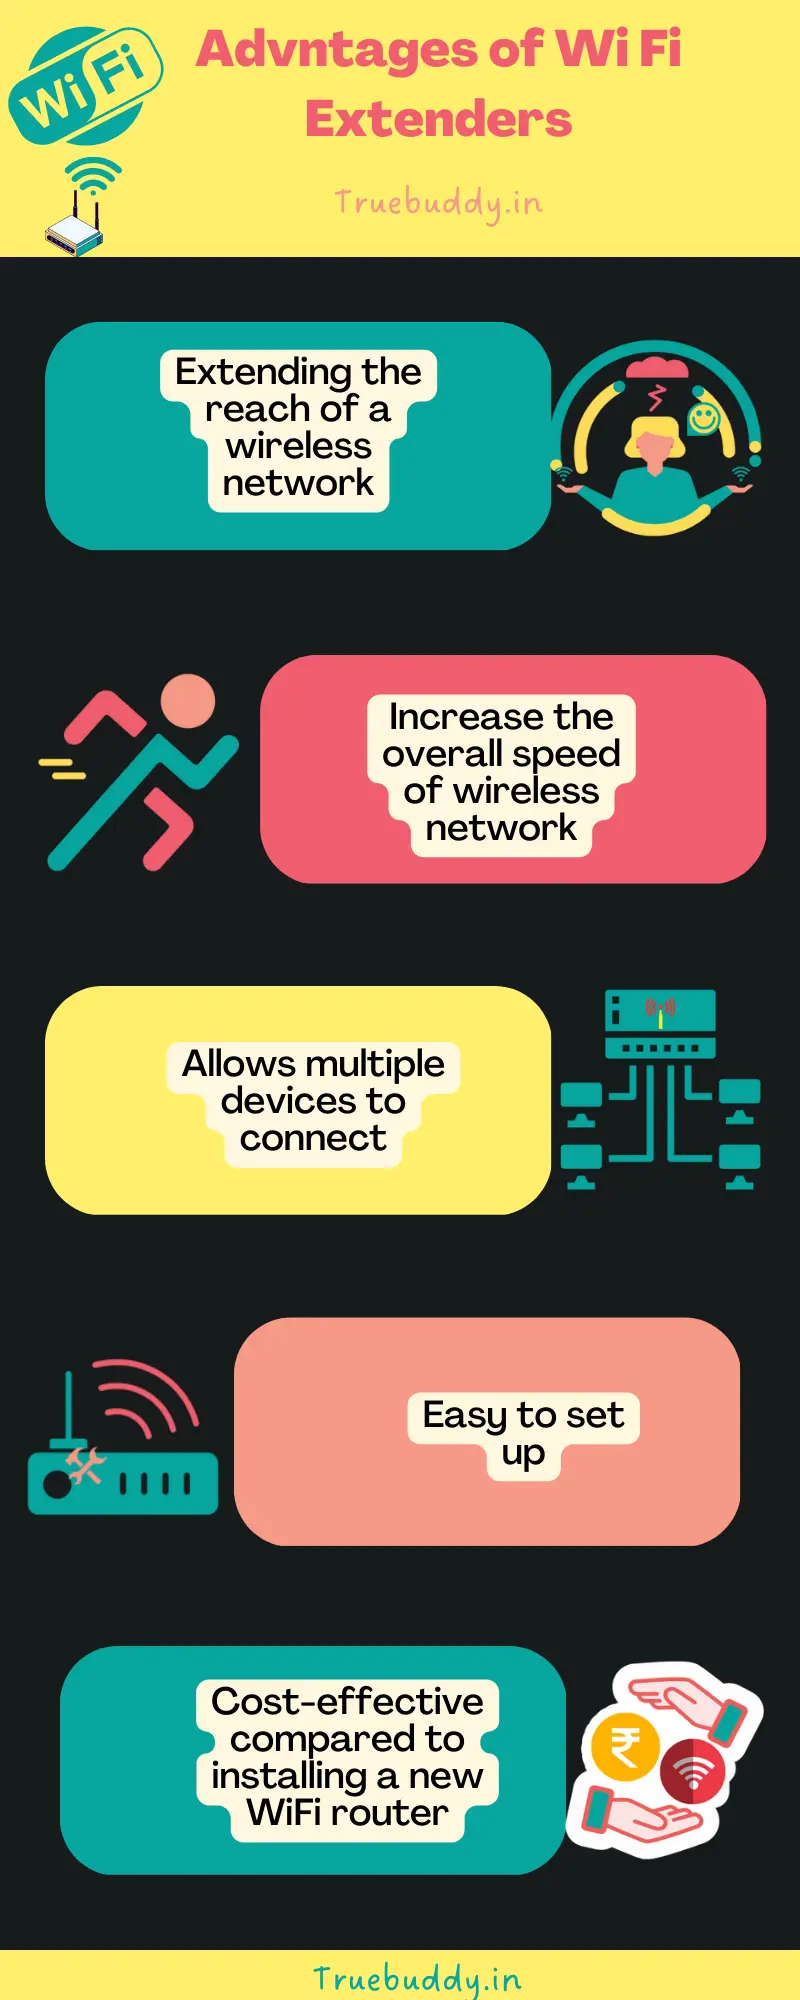 Advantages of Wifi Extenders